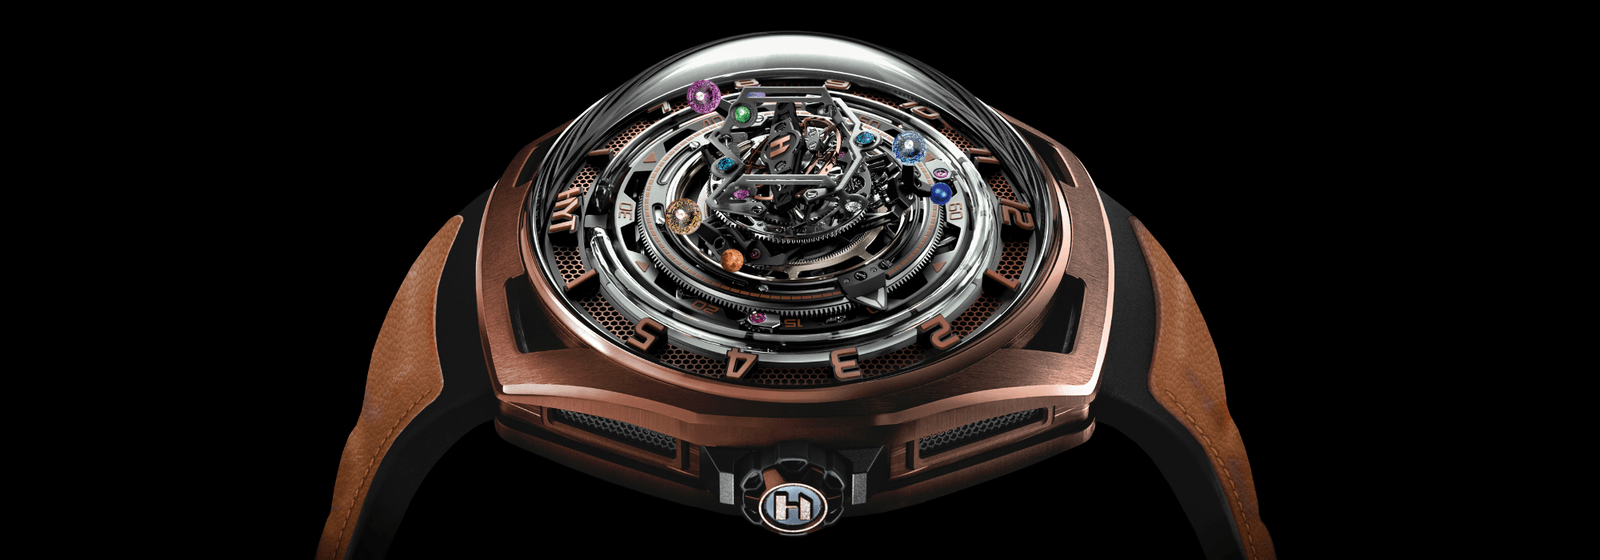 HYT's New Conical Tourbillon Dazzles with Sapphires and Fluidic Animation